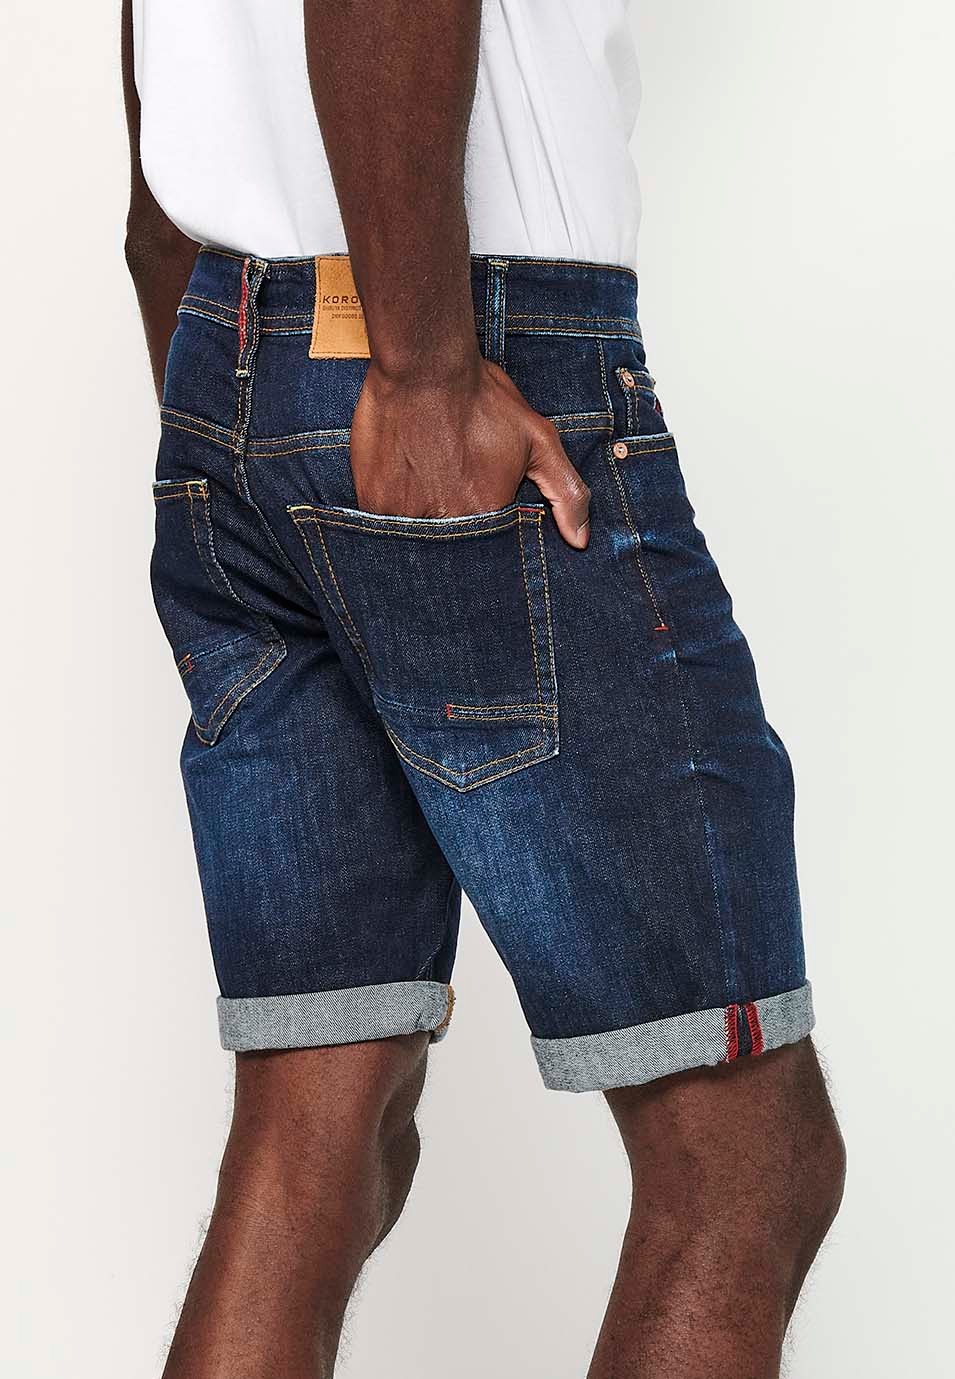 Shorts with turn-up finish and front zipper and button closure with five pockets, one blue pocket pocket for Men 9